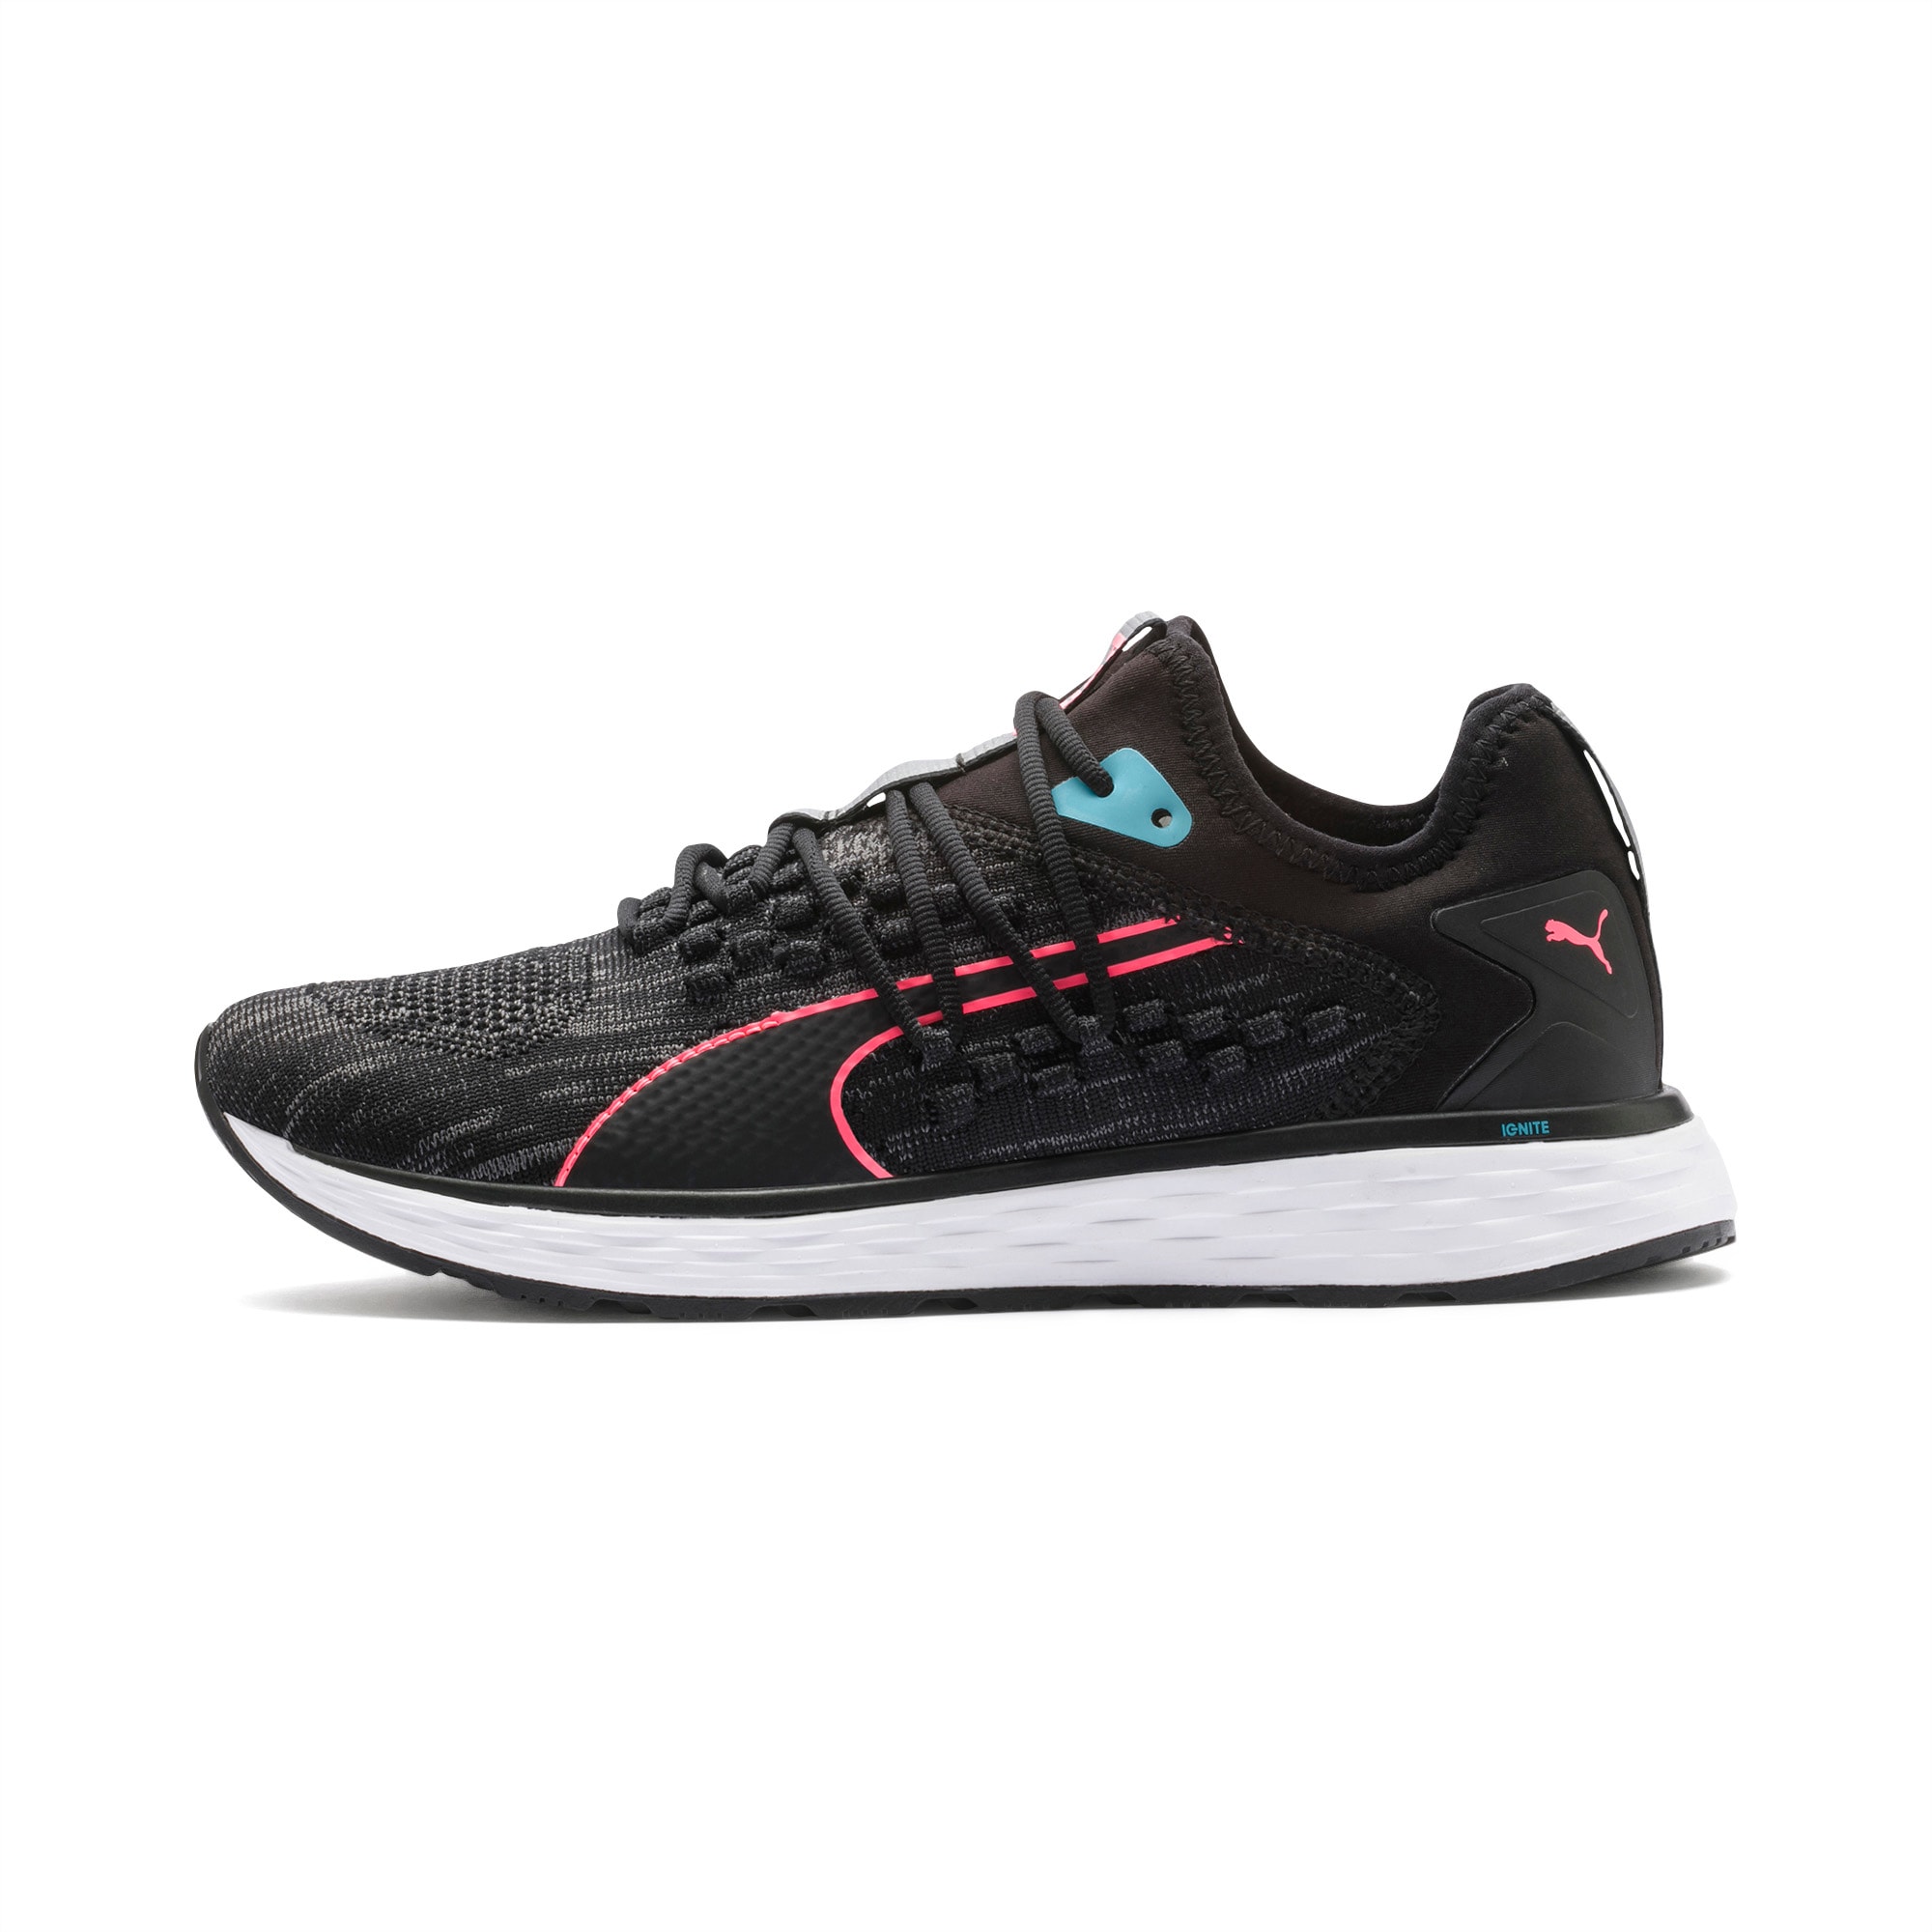 sports shoes for womens puma